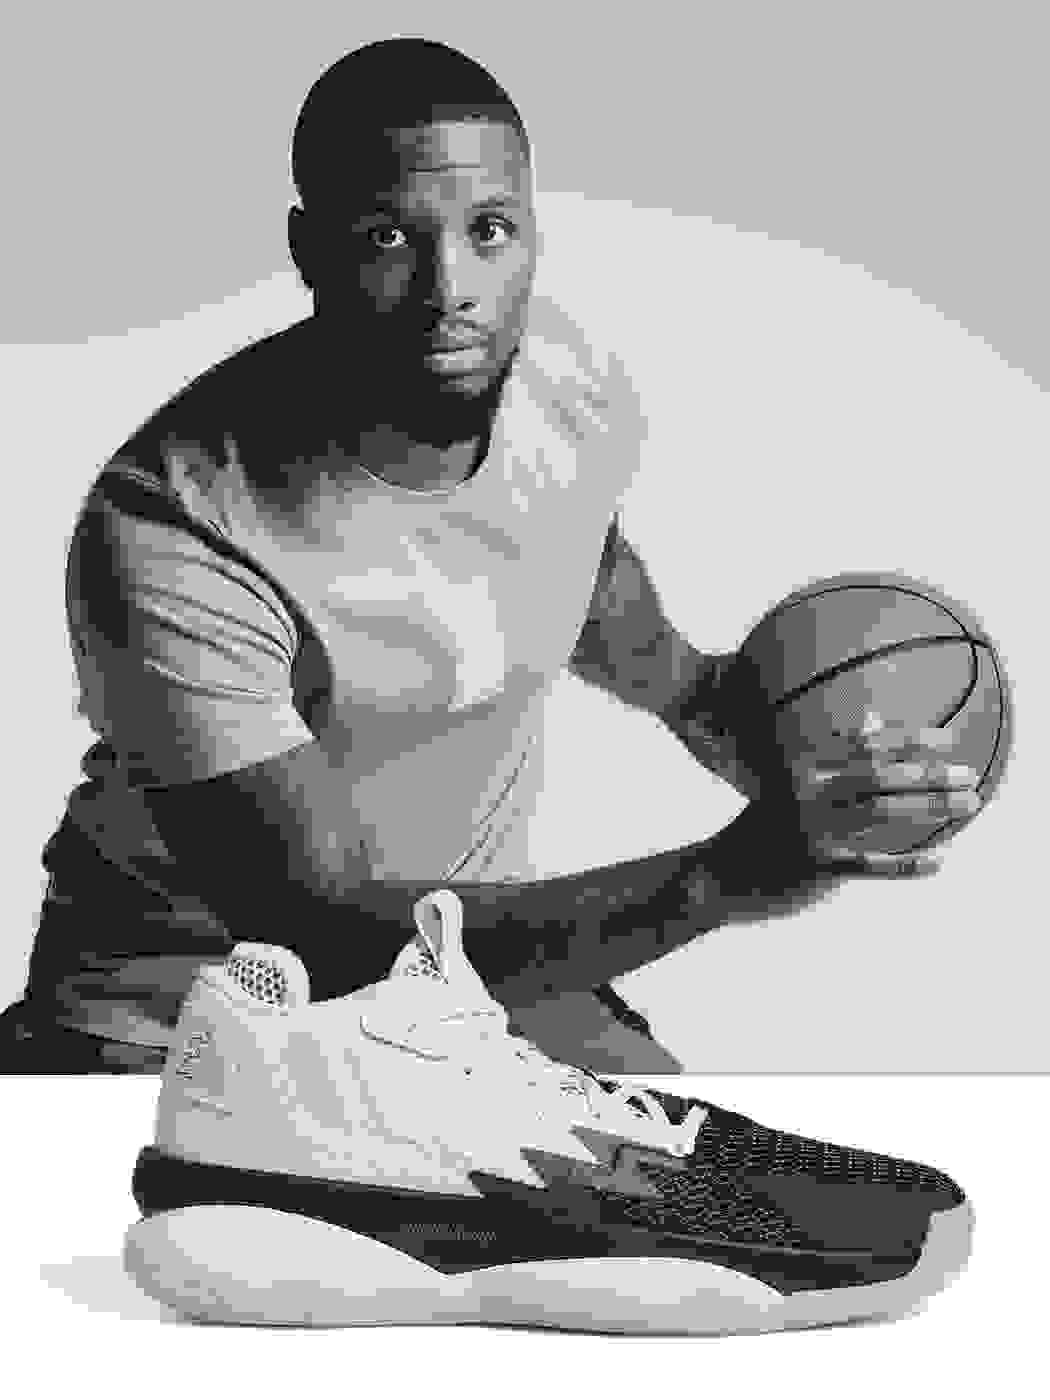 Professional basketball player Damian Lillard holding a basketball with a white and black shoe in the front.